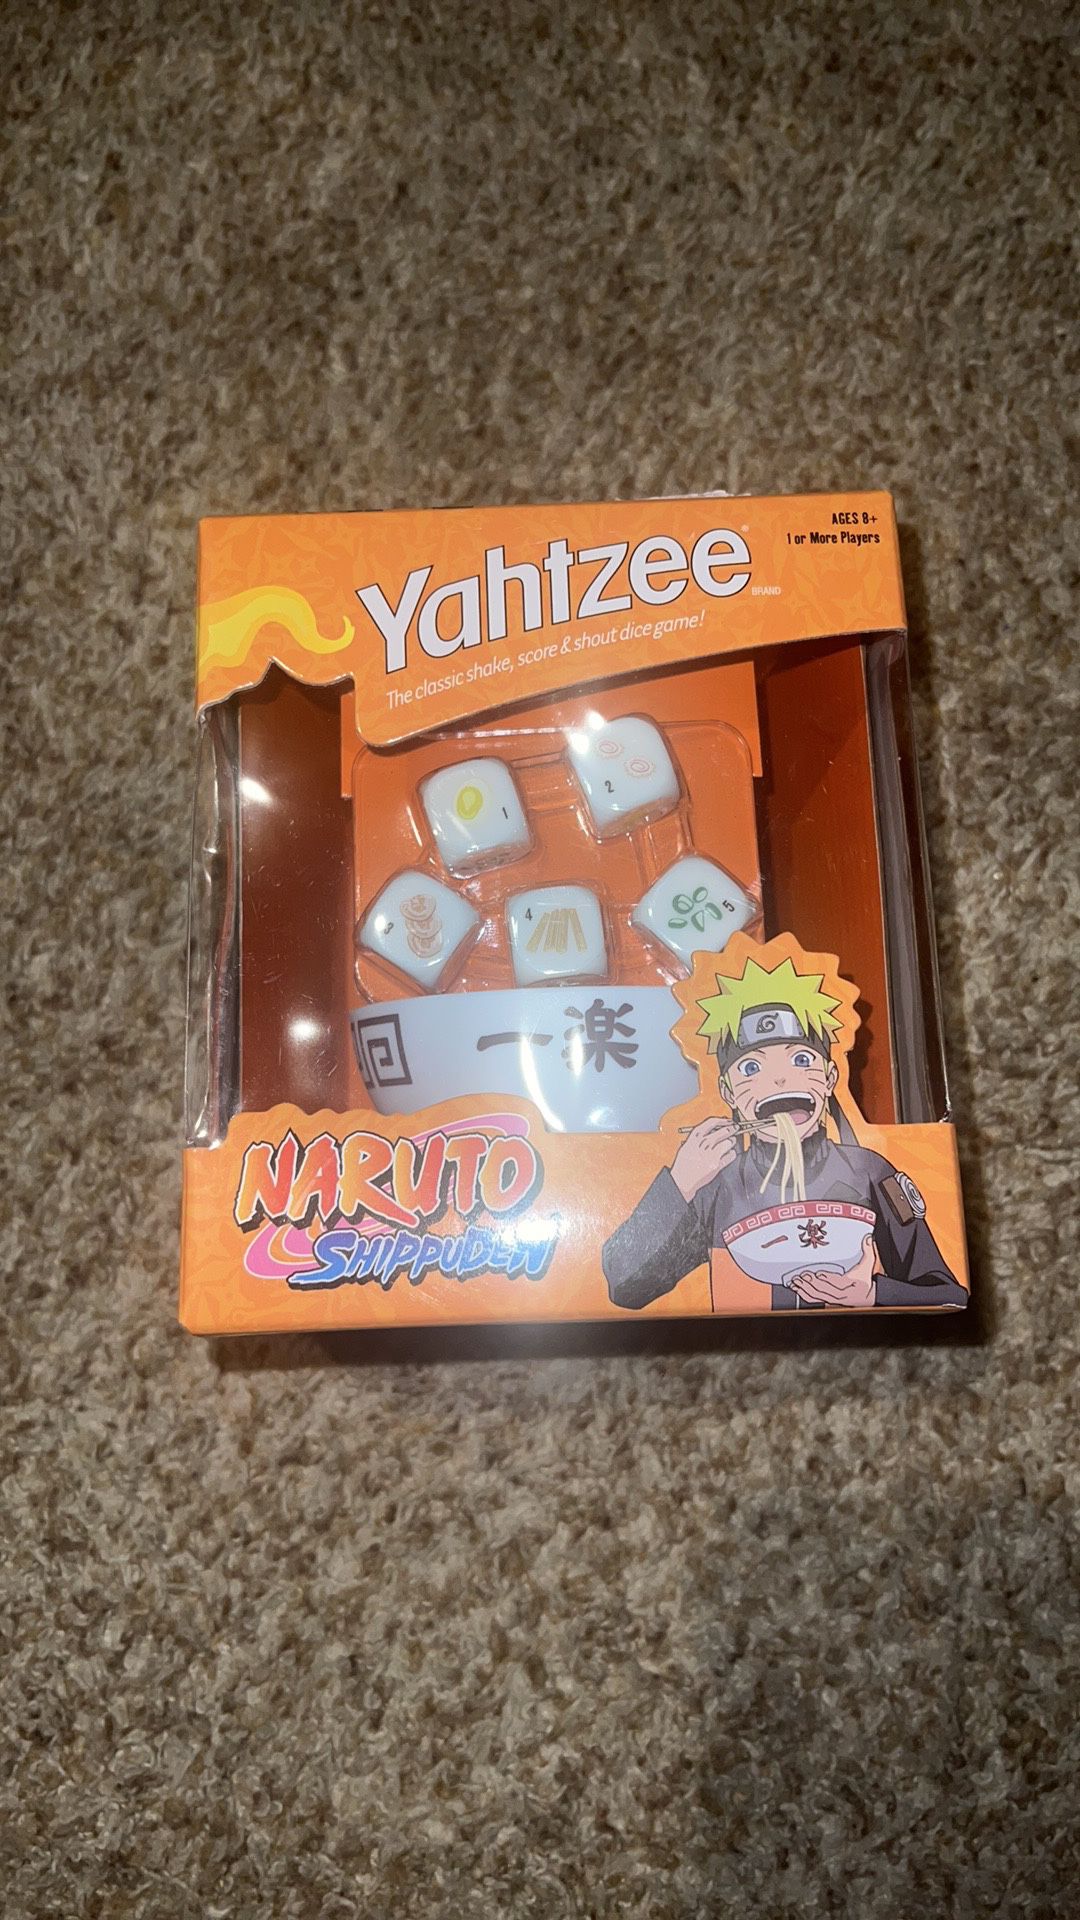 USAOPOLY YAHTZEE: Naruto Shippuden | Collectible Ramen Bowl Dice Cup | Classic Dice Game Based on Anime Show | Great for Family Night | Officially-Lic